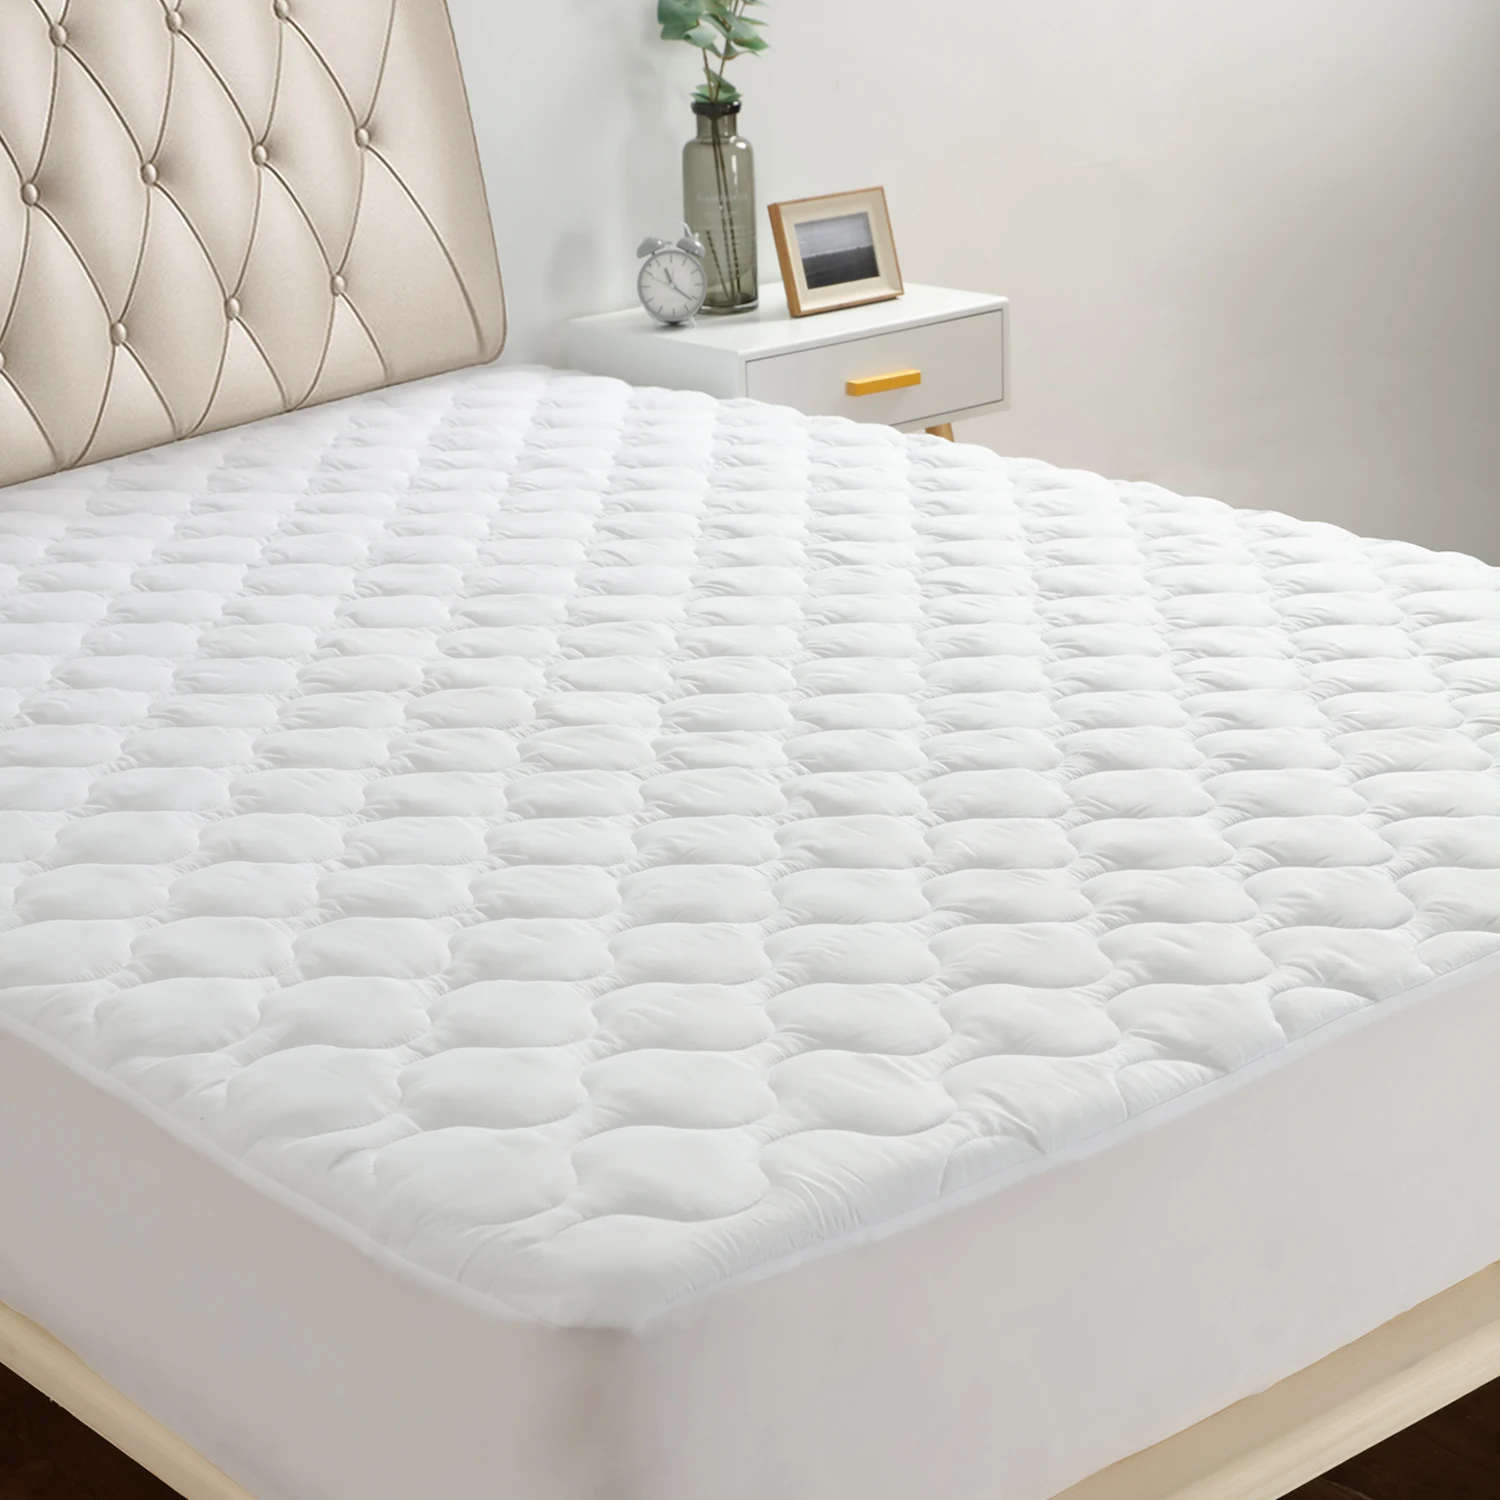 Queen Size Quilted Anti Static Mattress Protector Cover Bed Bugs Buy Mattress Protector Bed Bugs Anti Static Mattress Cover Mattress Cover Queen Size Product On Alibaba Com